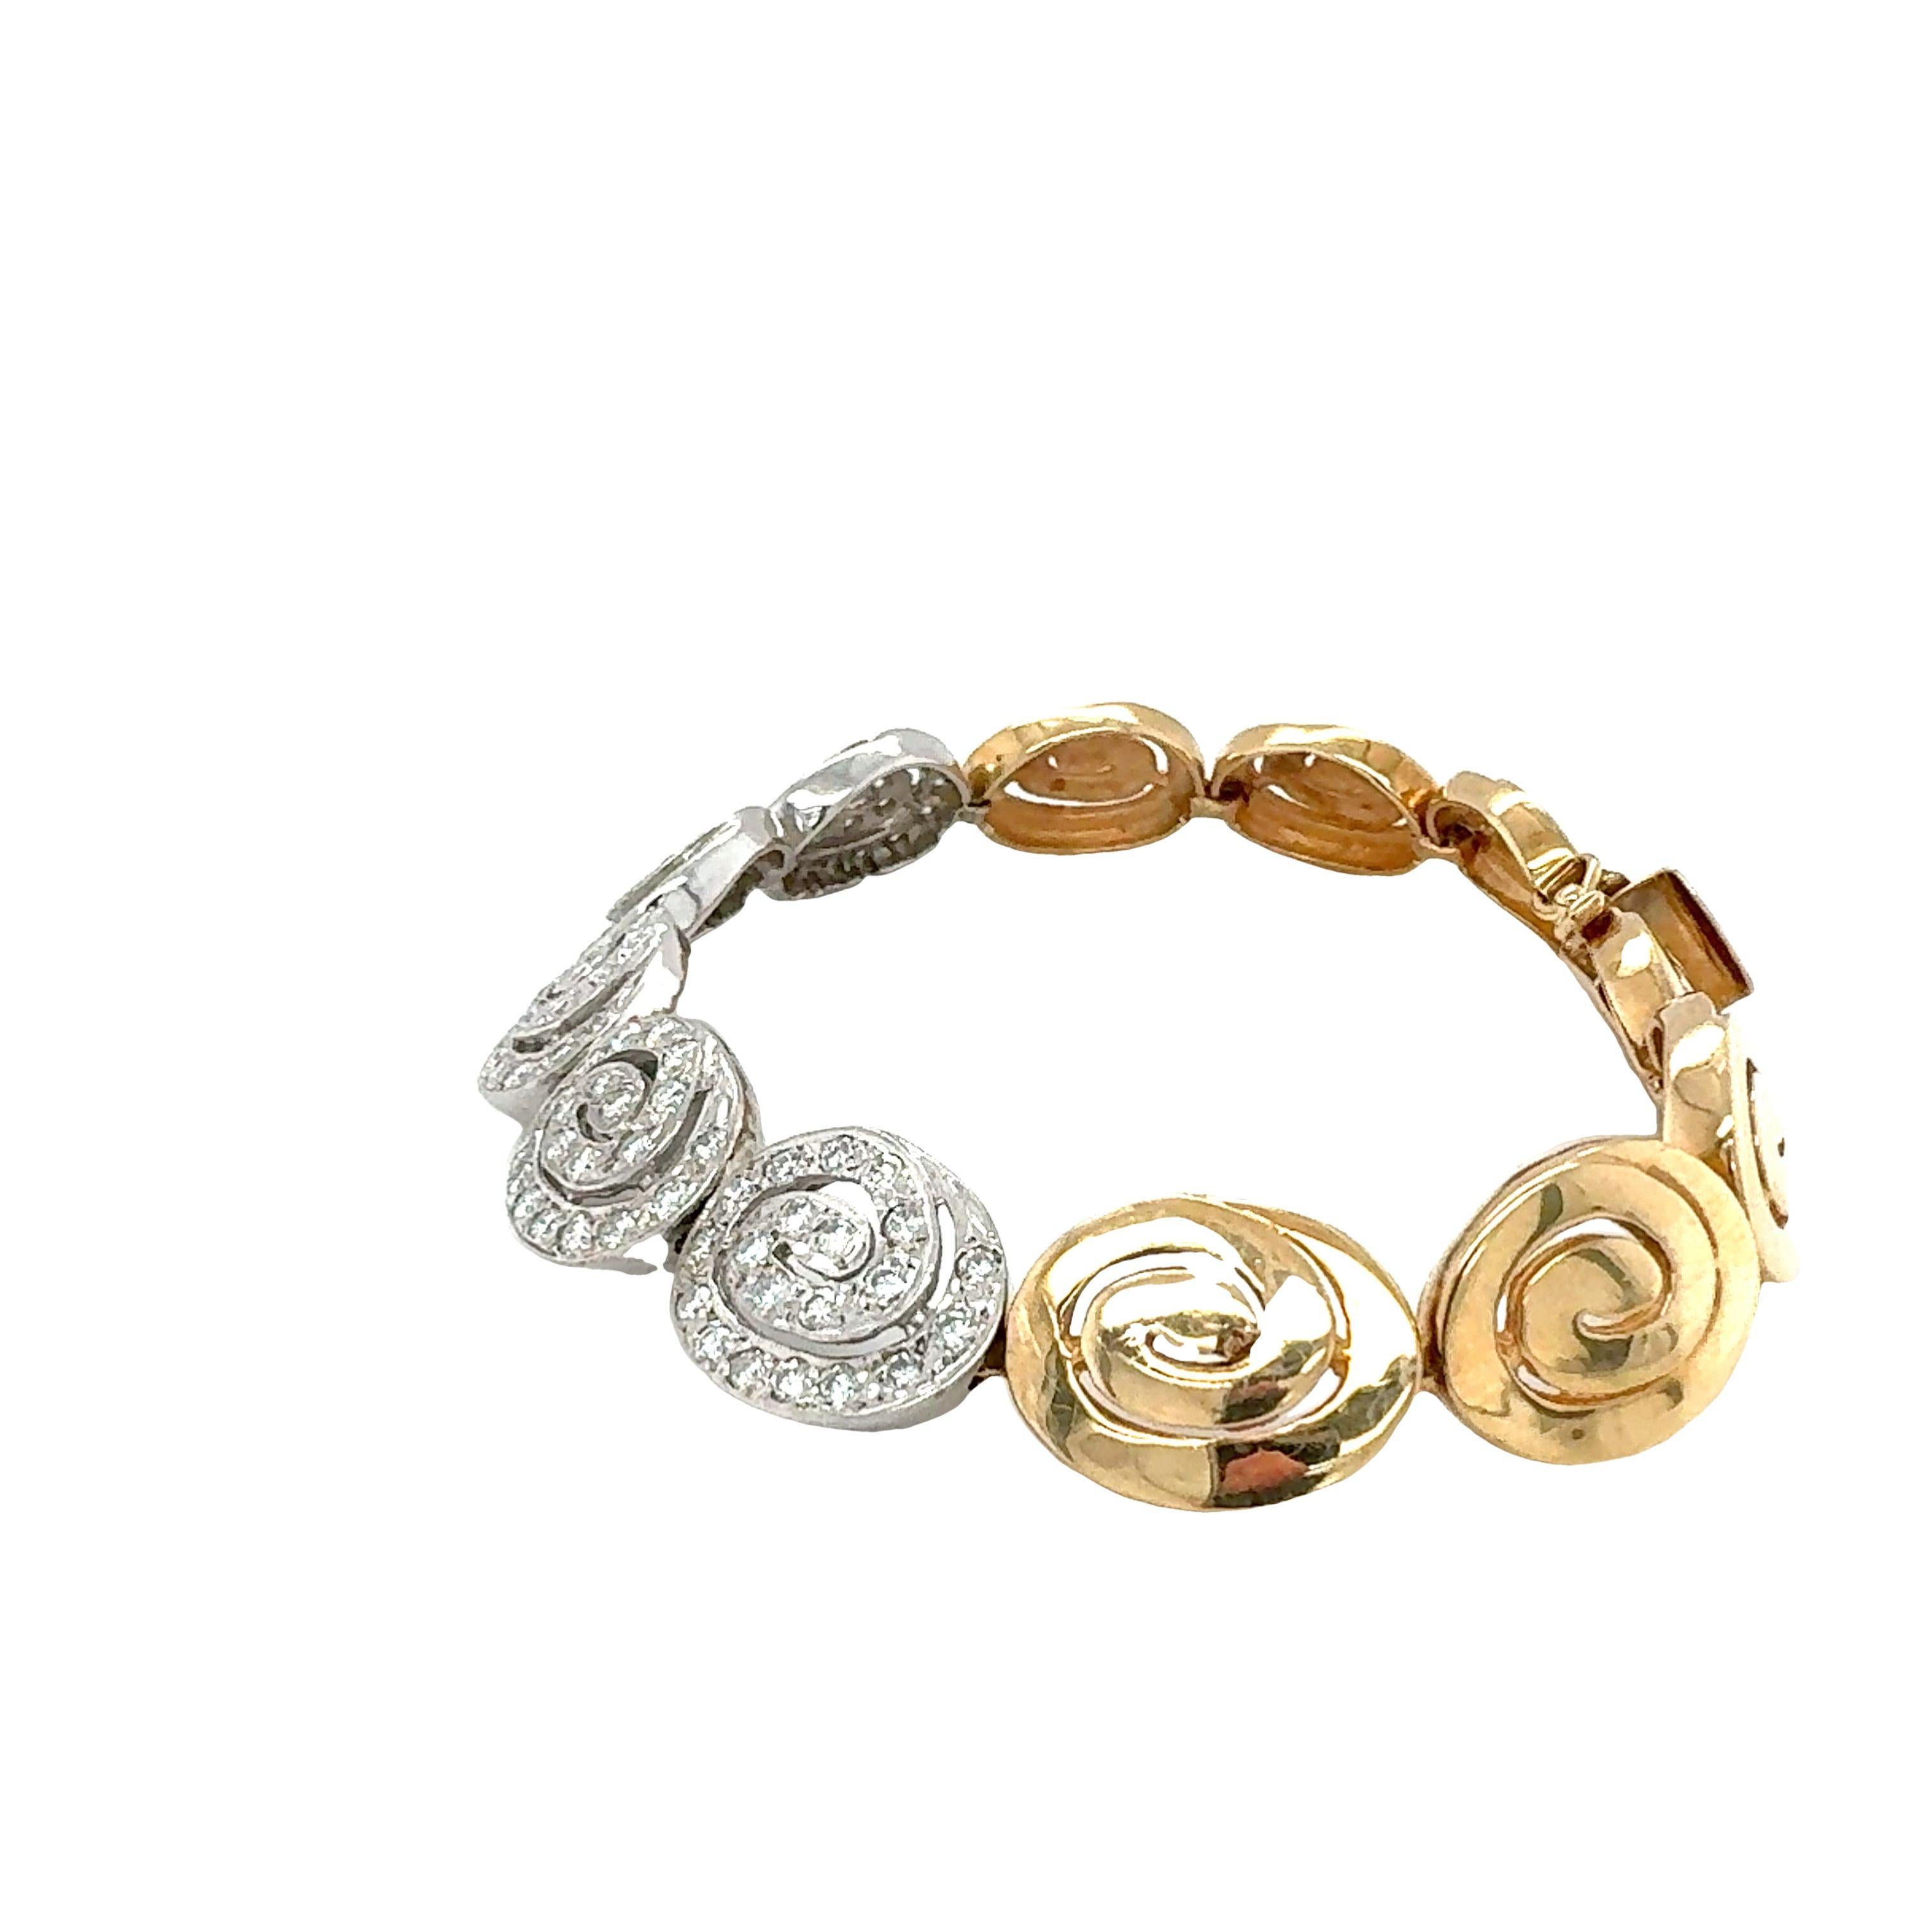 One 14K yellow and white gold diamond set oval swirl motif link bracelet with 100 bead set, round brilliant cut diamonds weighing 1.54 ct. in total with G-H color and VS-2 clarity. Matches with NO.EB.4.

Metal: 14K Yellow and White Gold
Gemstone: